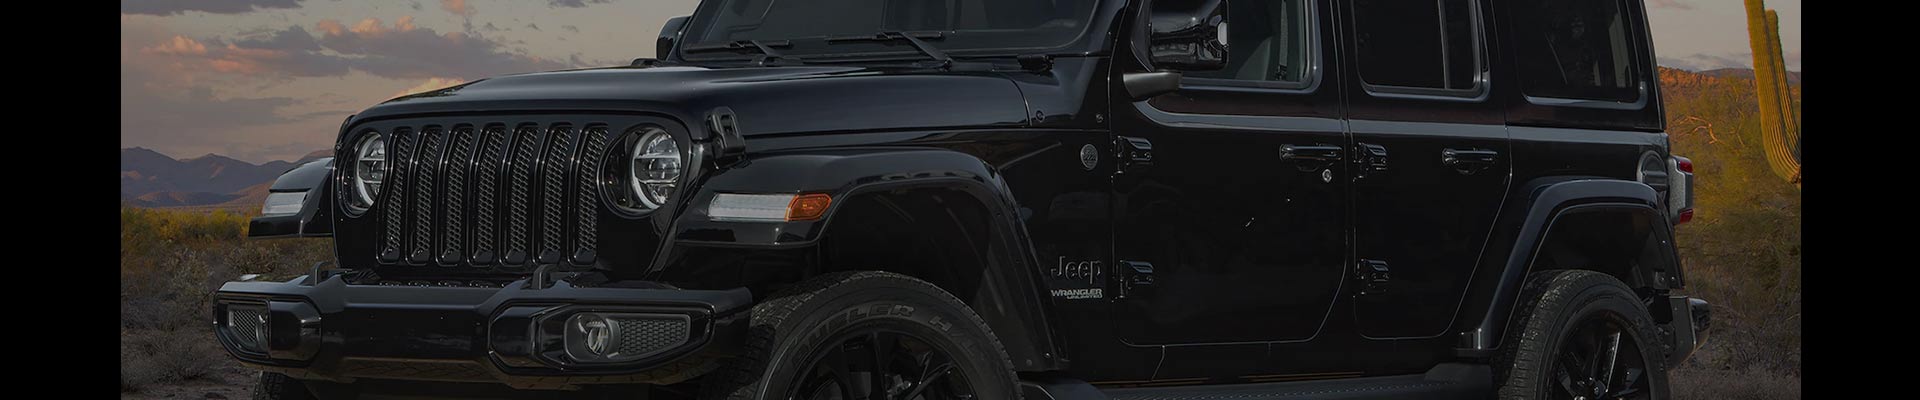 Shop Replacement and OEM 2000 Jeep Wrangler Parts with Discounted Price on the Net